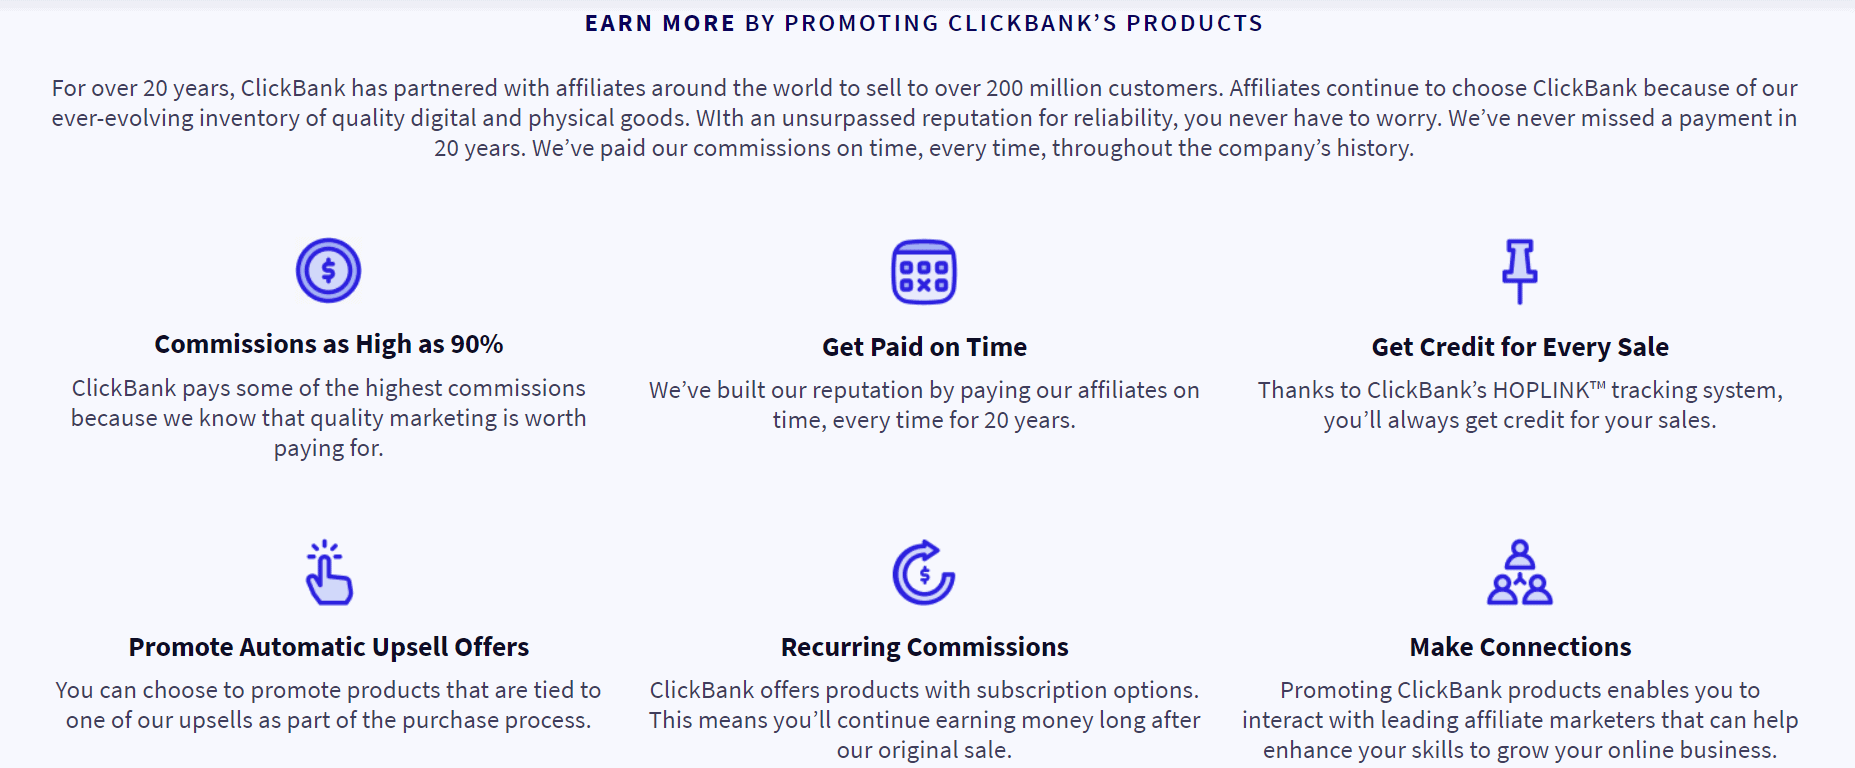 EARN MORE BY PROMOTING CLICKBANK’S PRODUCTS